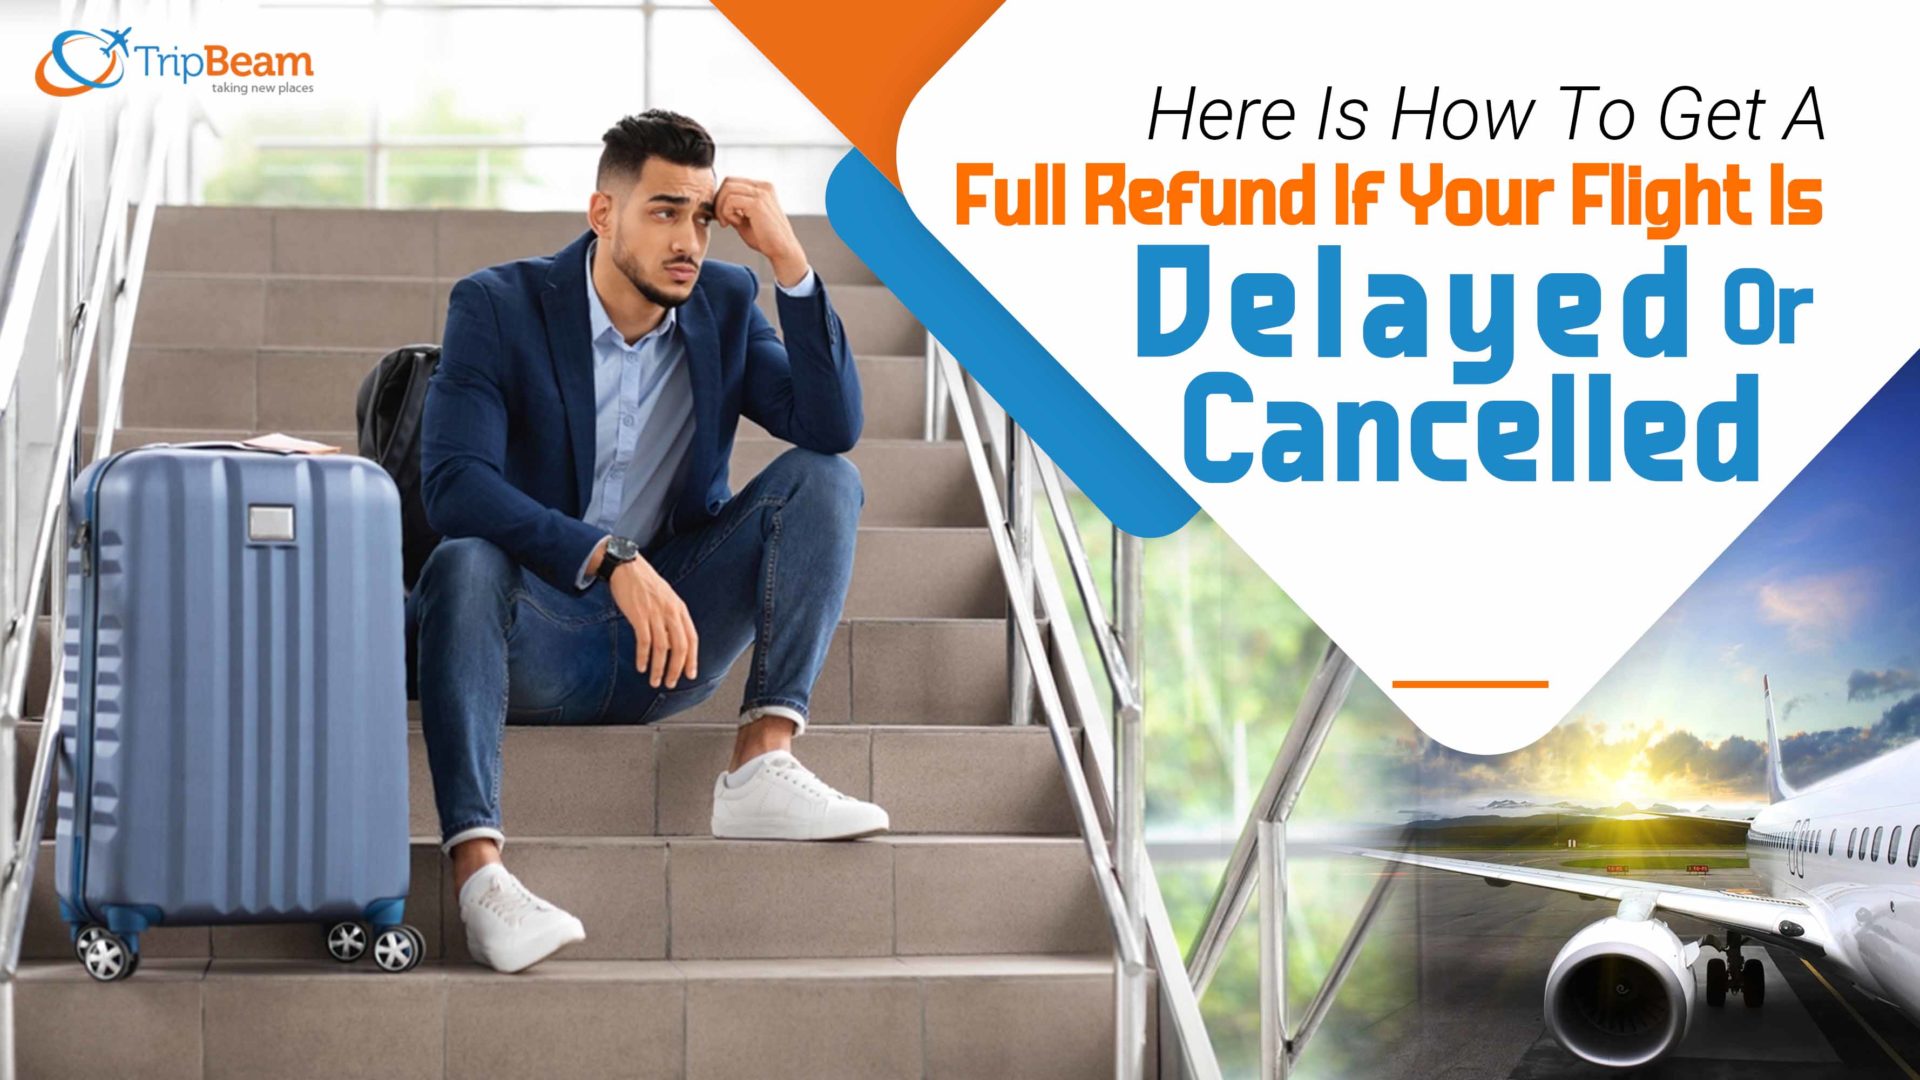 Here Is How To Get A Full Refund If Your Flight Is Delayed Or Cancelled